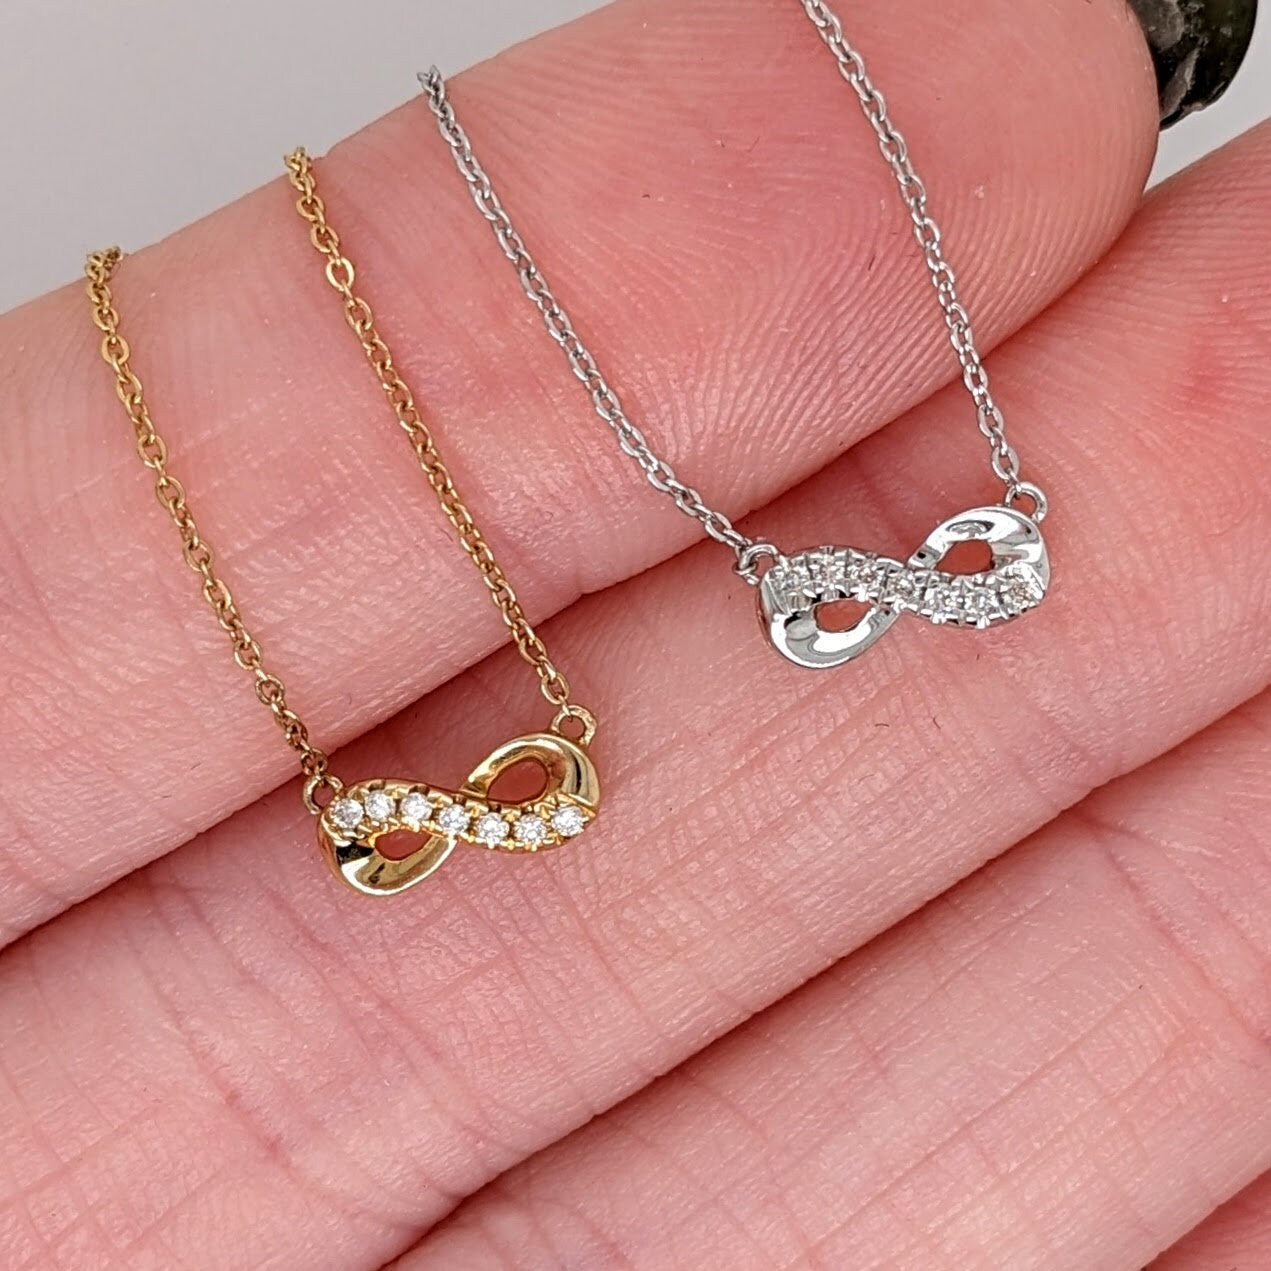 Chains-Cute Infinity Sign Pendant in Solid 14k White and Yellow Gold with Natural Diamonds || Dainty Gold Necklace || Chain || Customizable || - NNJGemstones